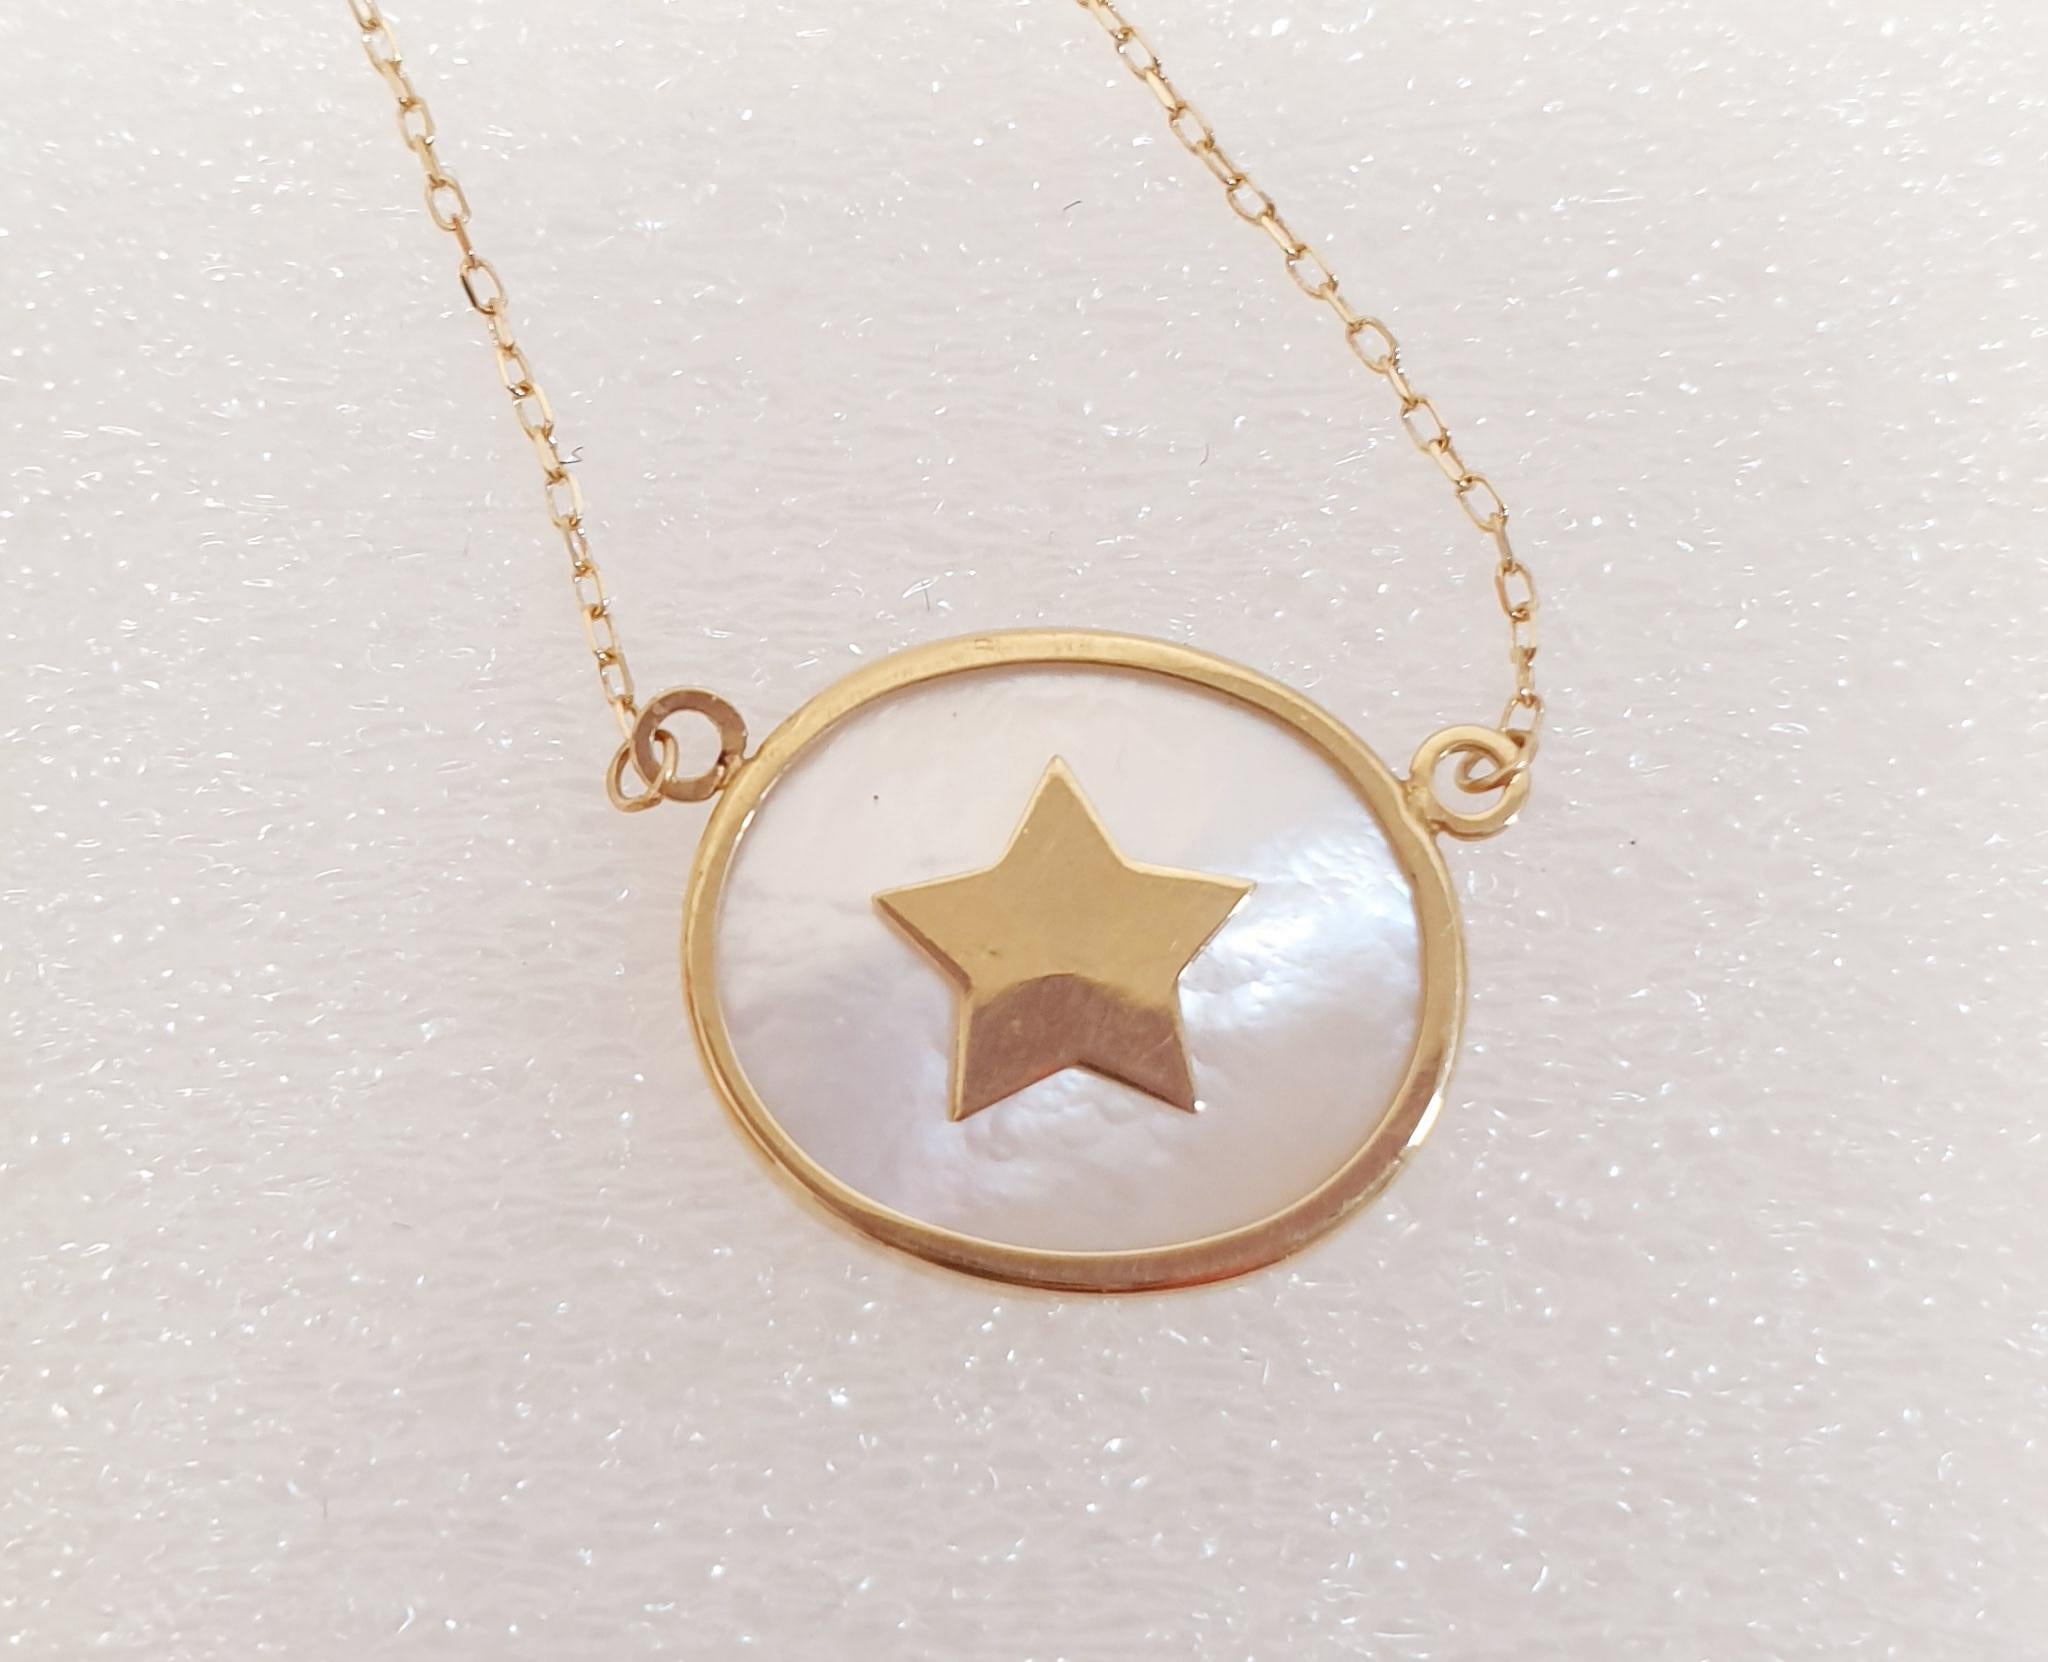 Oval Cut 18 Karat Yellow Gold Chain with Star and White Nacre Pendant For Sale